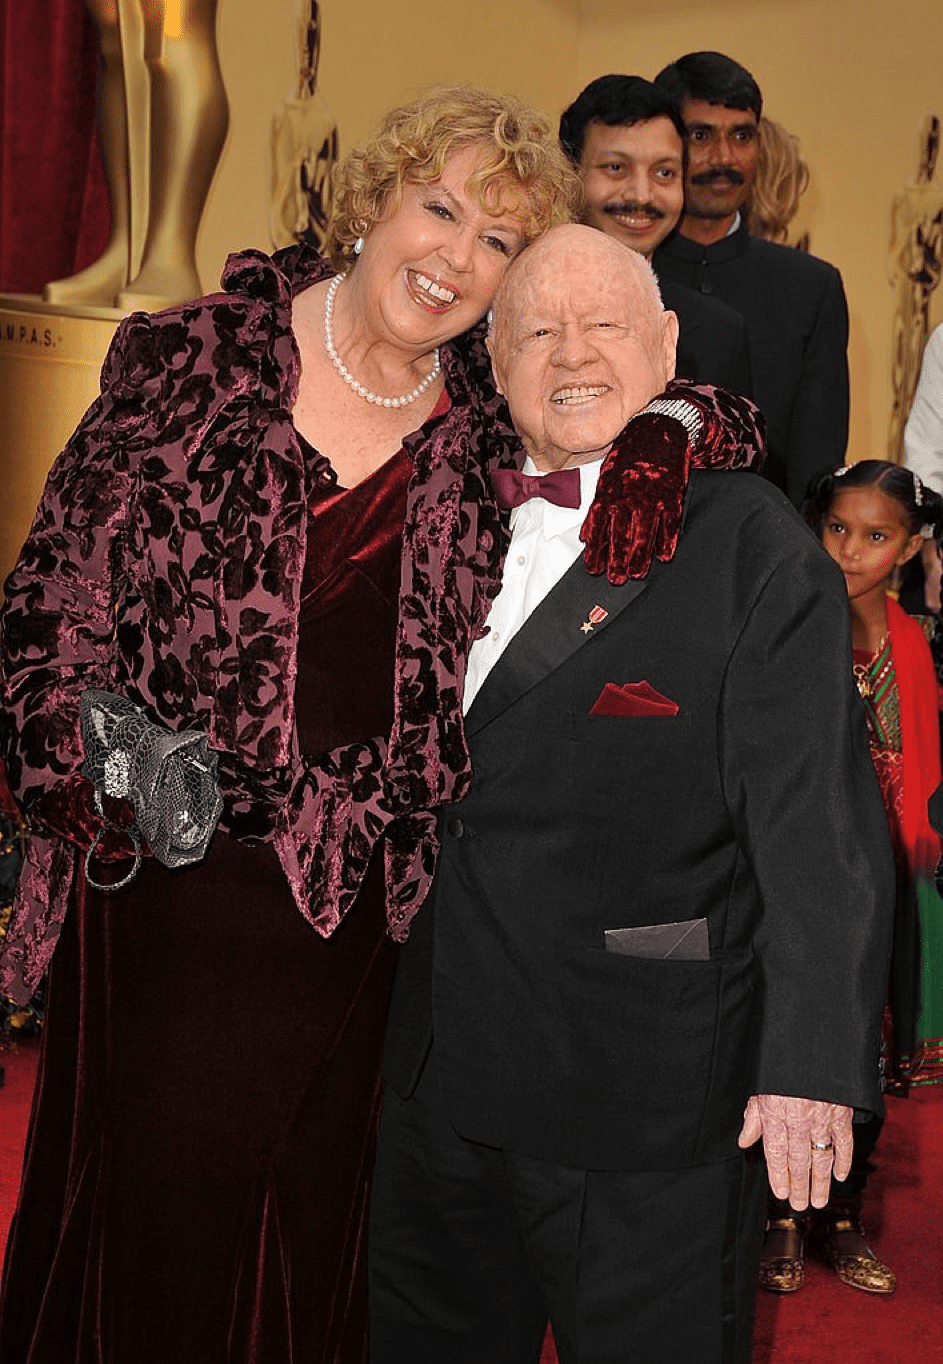 Mickey Rooney und Jan Chamberlin am 22.02.09 in Hollywood. | Quelle: Getty Images